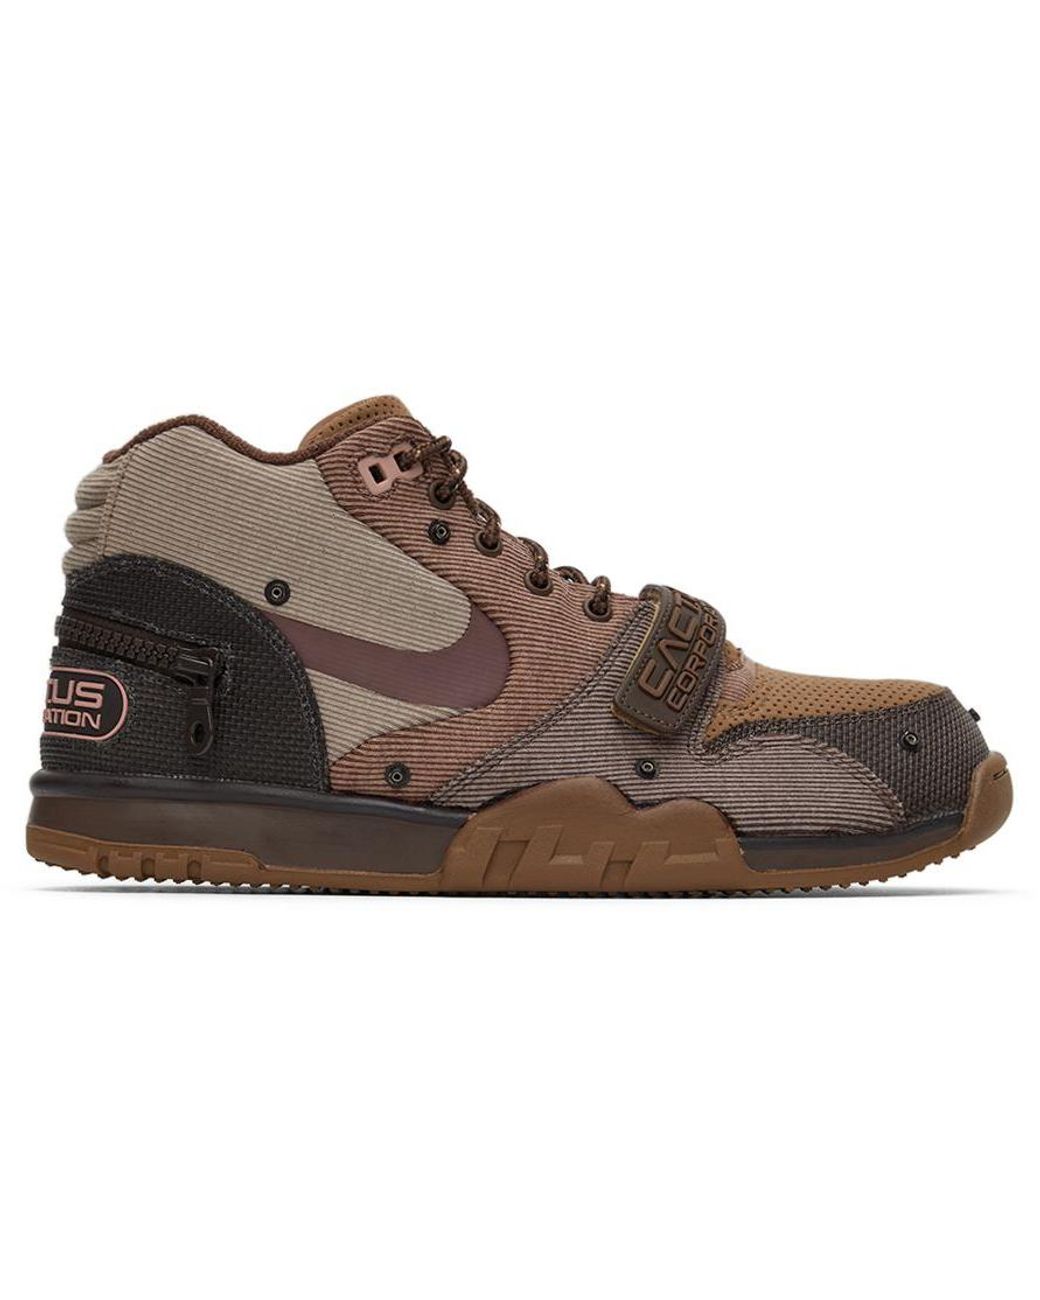 Nike Canvas Travis Scott Edition Air Trainer 1 Sp Sneakers in Black for ...